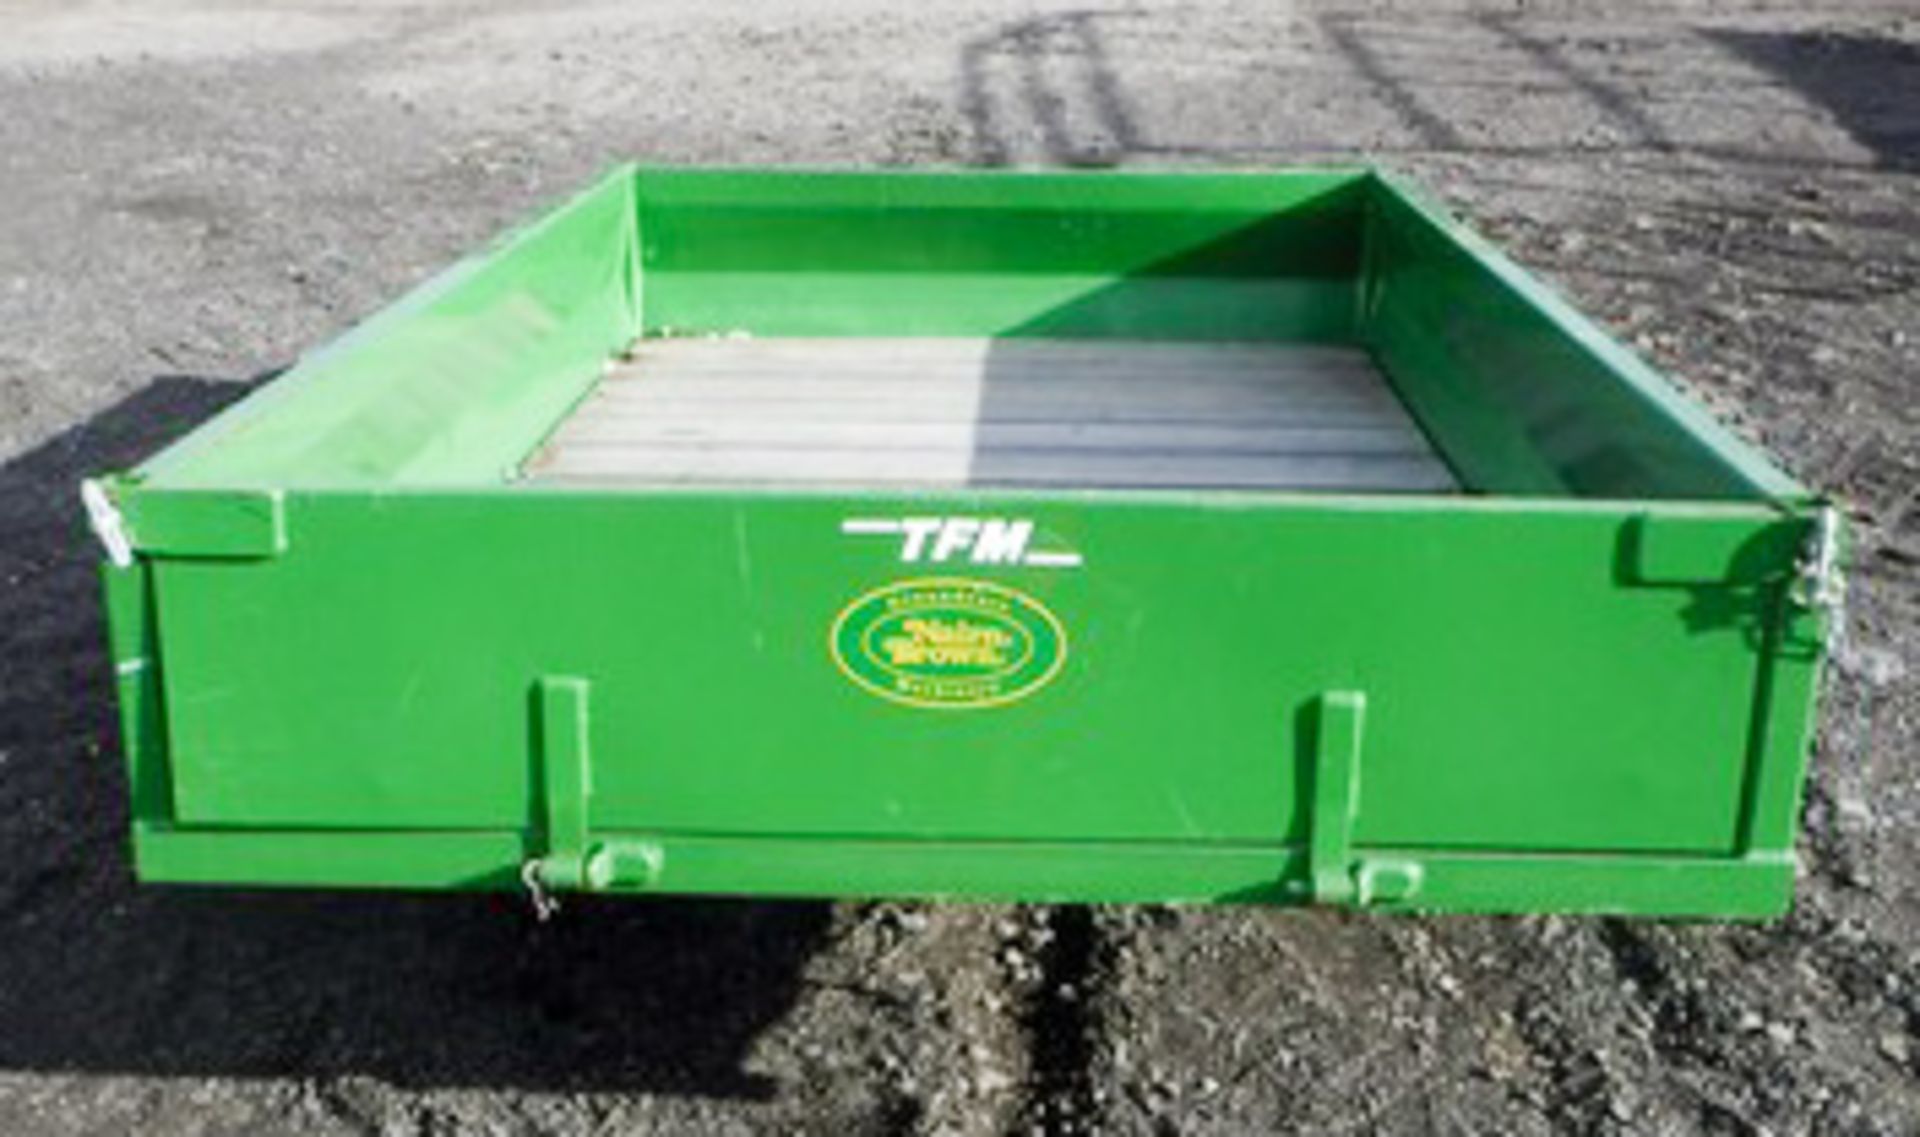 TFM GROUNDS TRAILER, ID 6435, SINGLE AXLE - Image 3 of 5